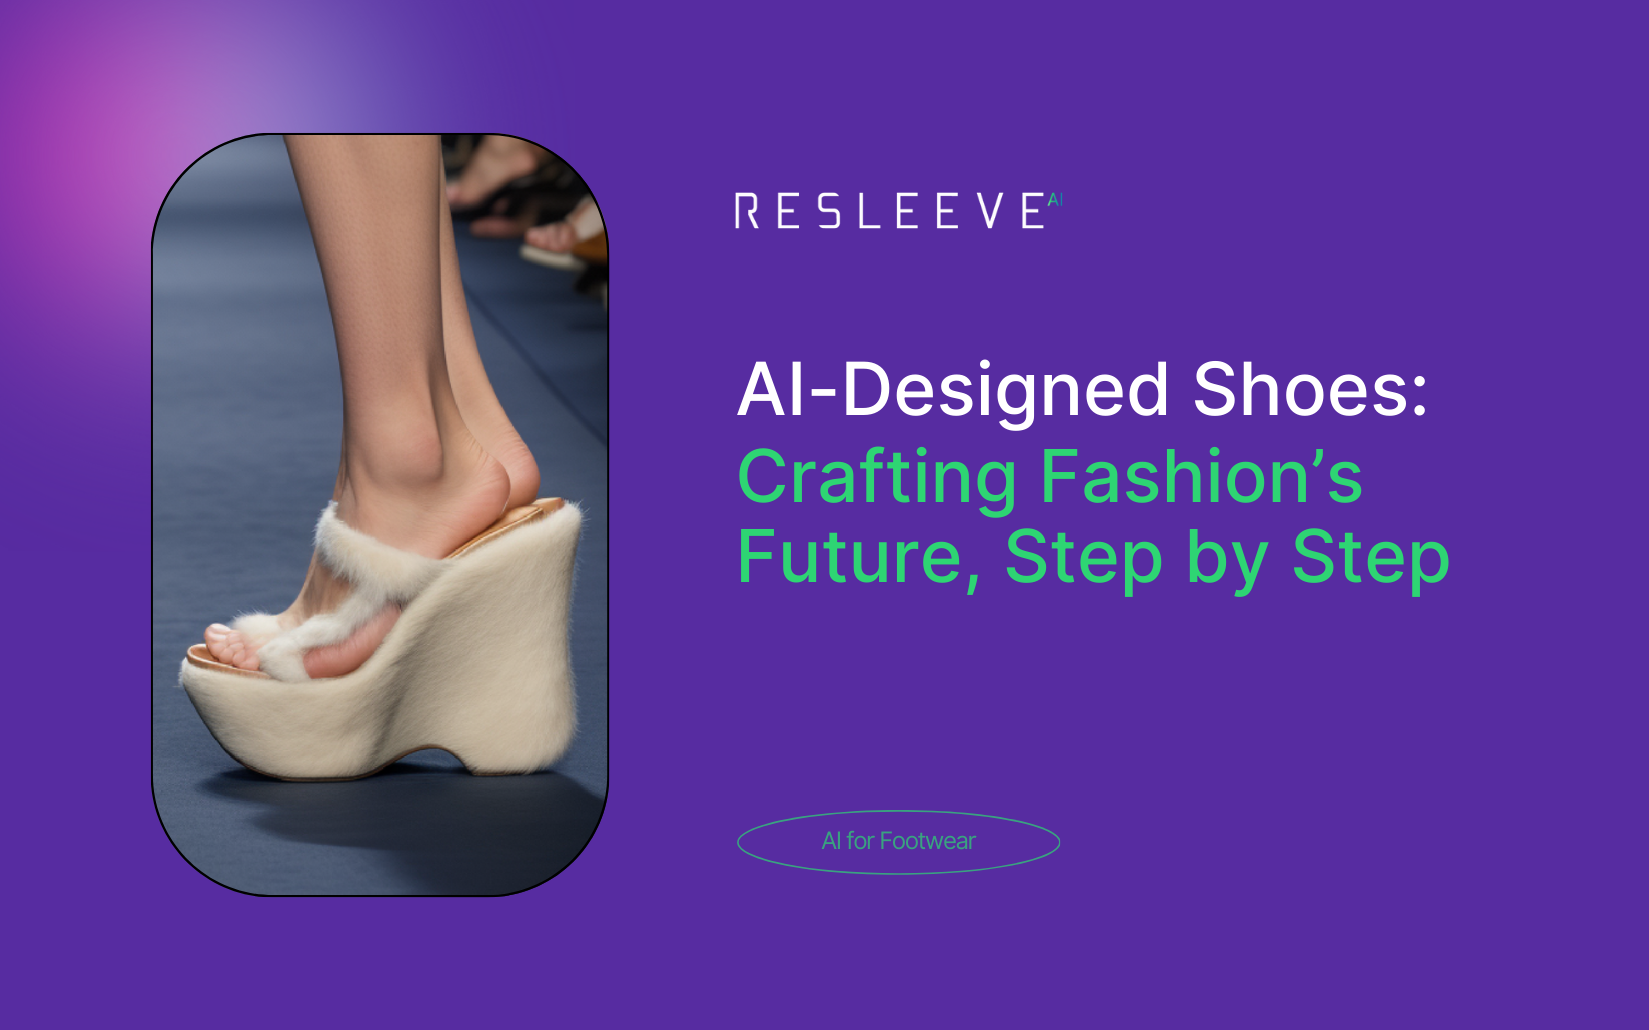 AI-Designed Shoes: Crafting Fashion’s Future, Step by Step